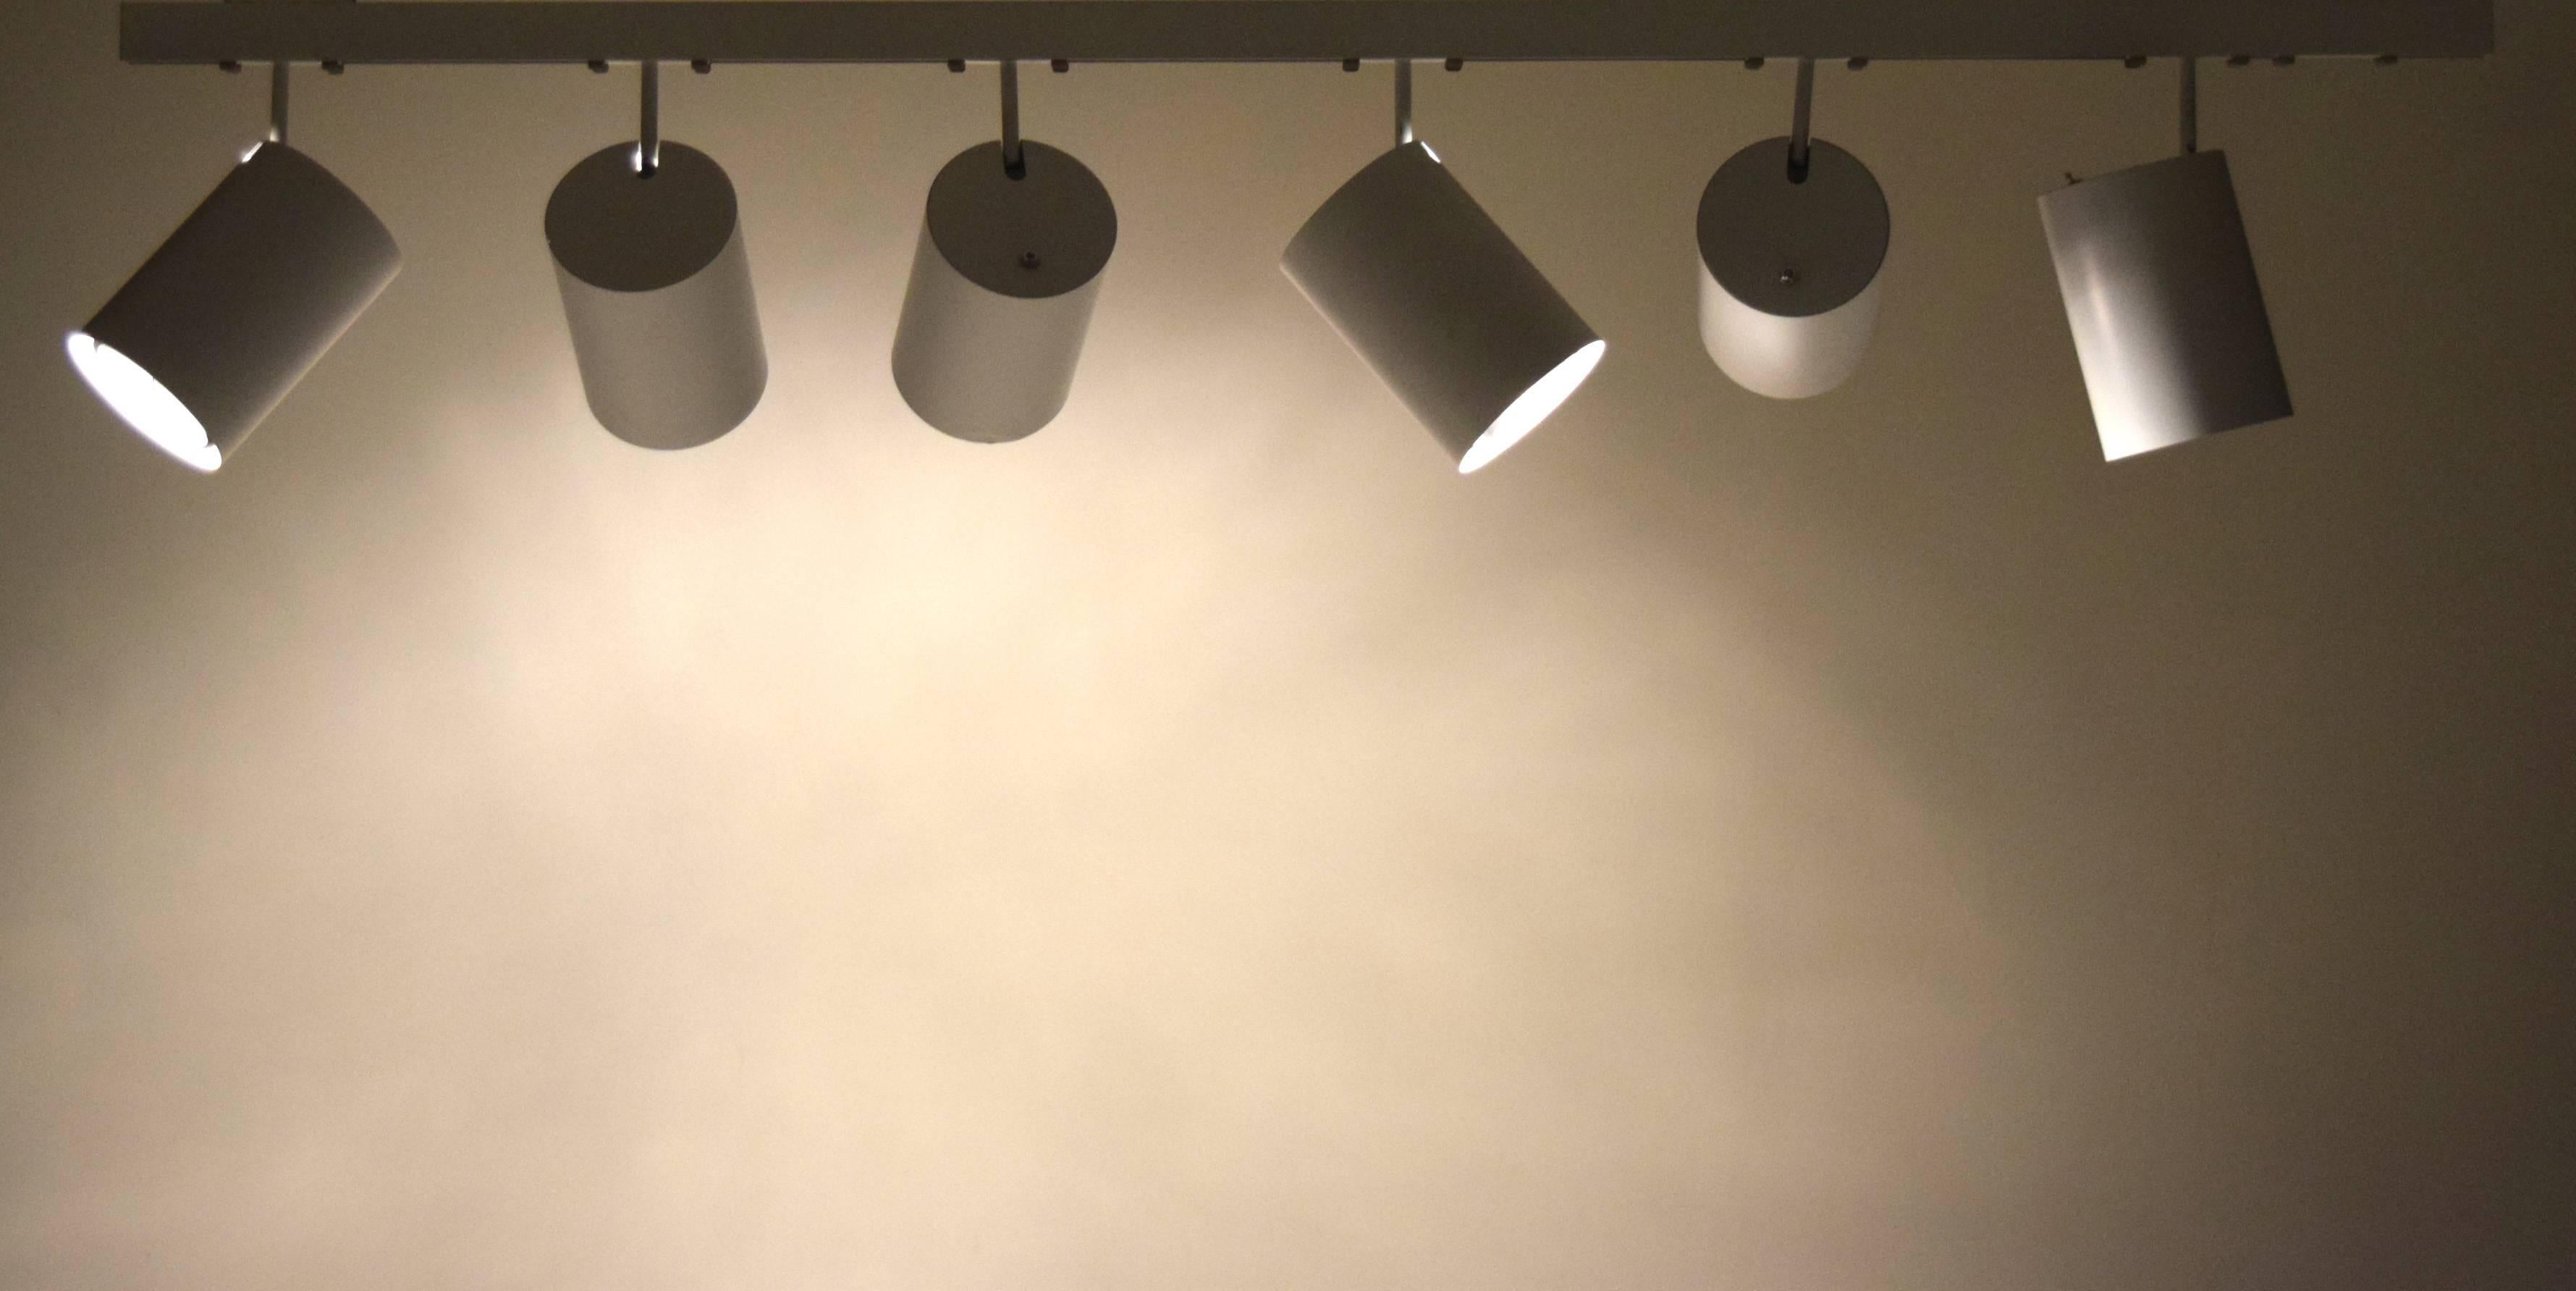 This listing is for one track with six lamps. Many such complete units are available for purchase (each unit has a single track and six lamps).

We have 2 units available.

Sightline S / P series.

Museum & architectural lighting for galleries,